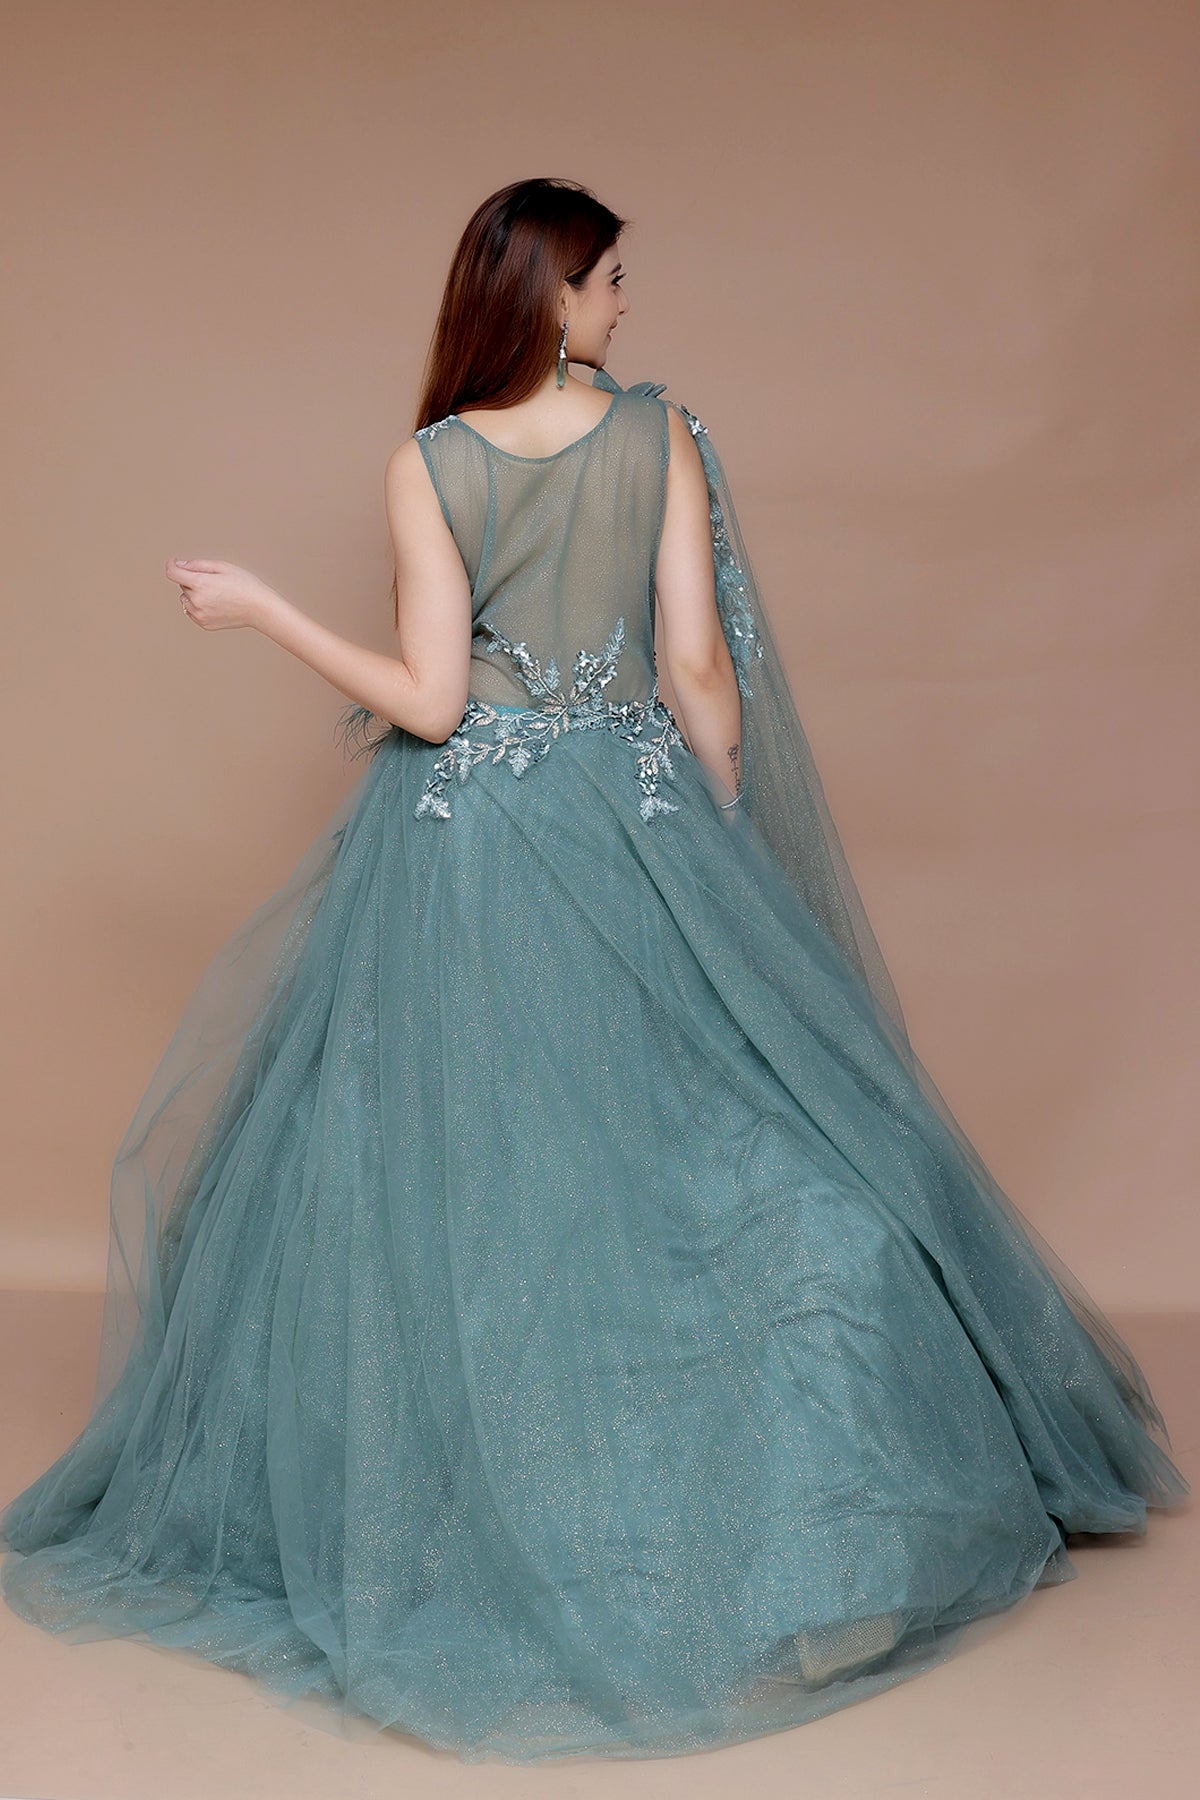 Bottle Green Gown in Net embellished with hand embroidery on yolk along with cape sleeve